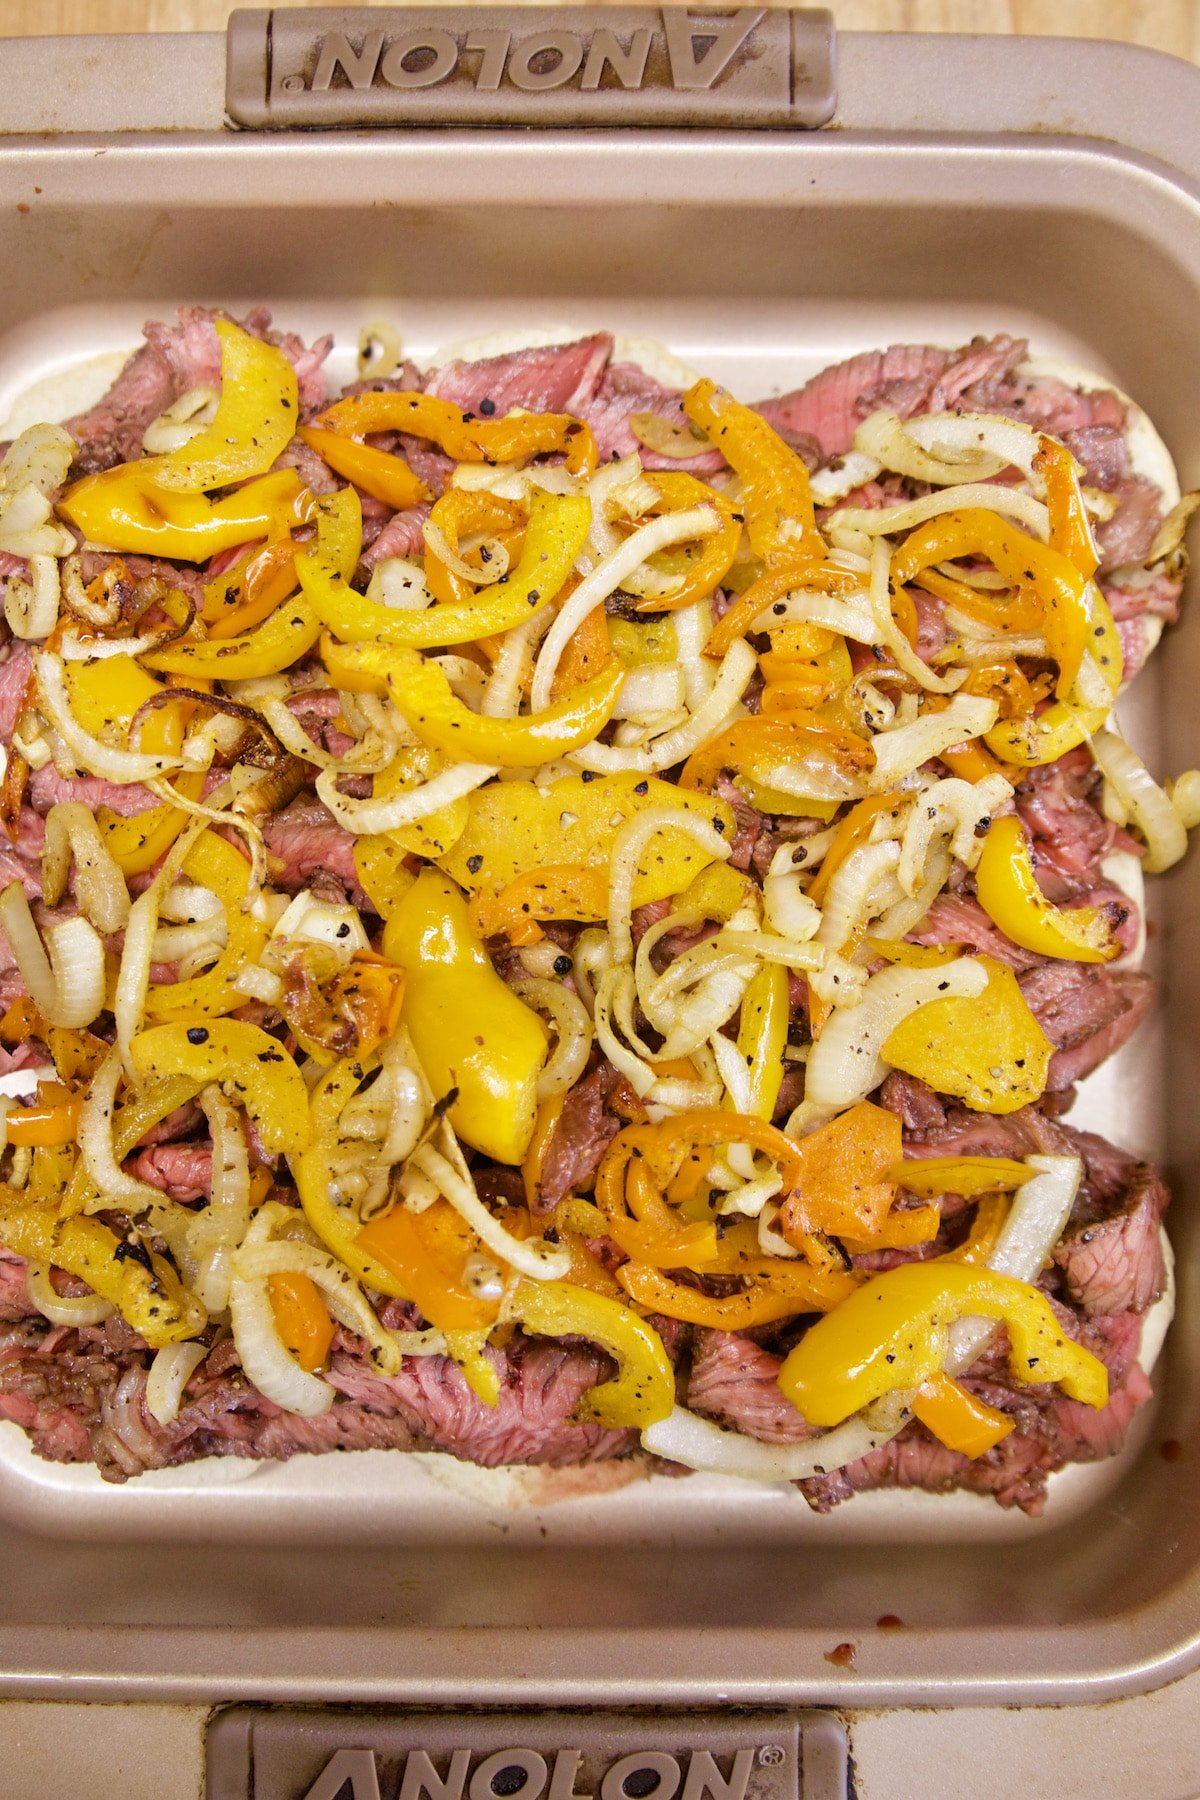 Pan of sliders with steak, peppers, onions.